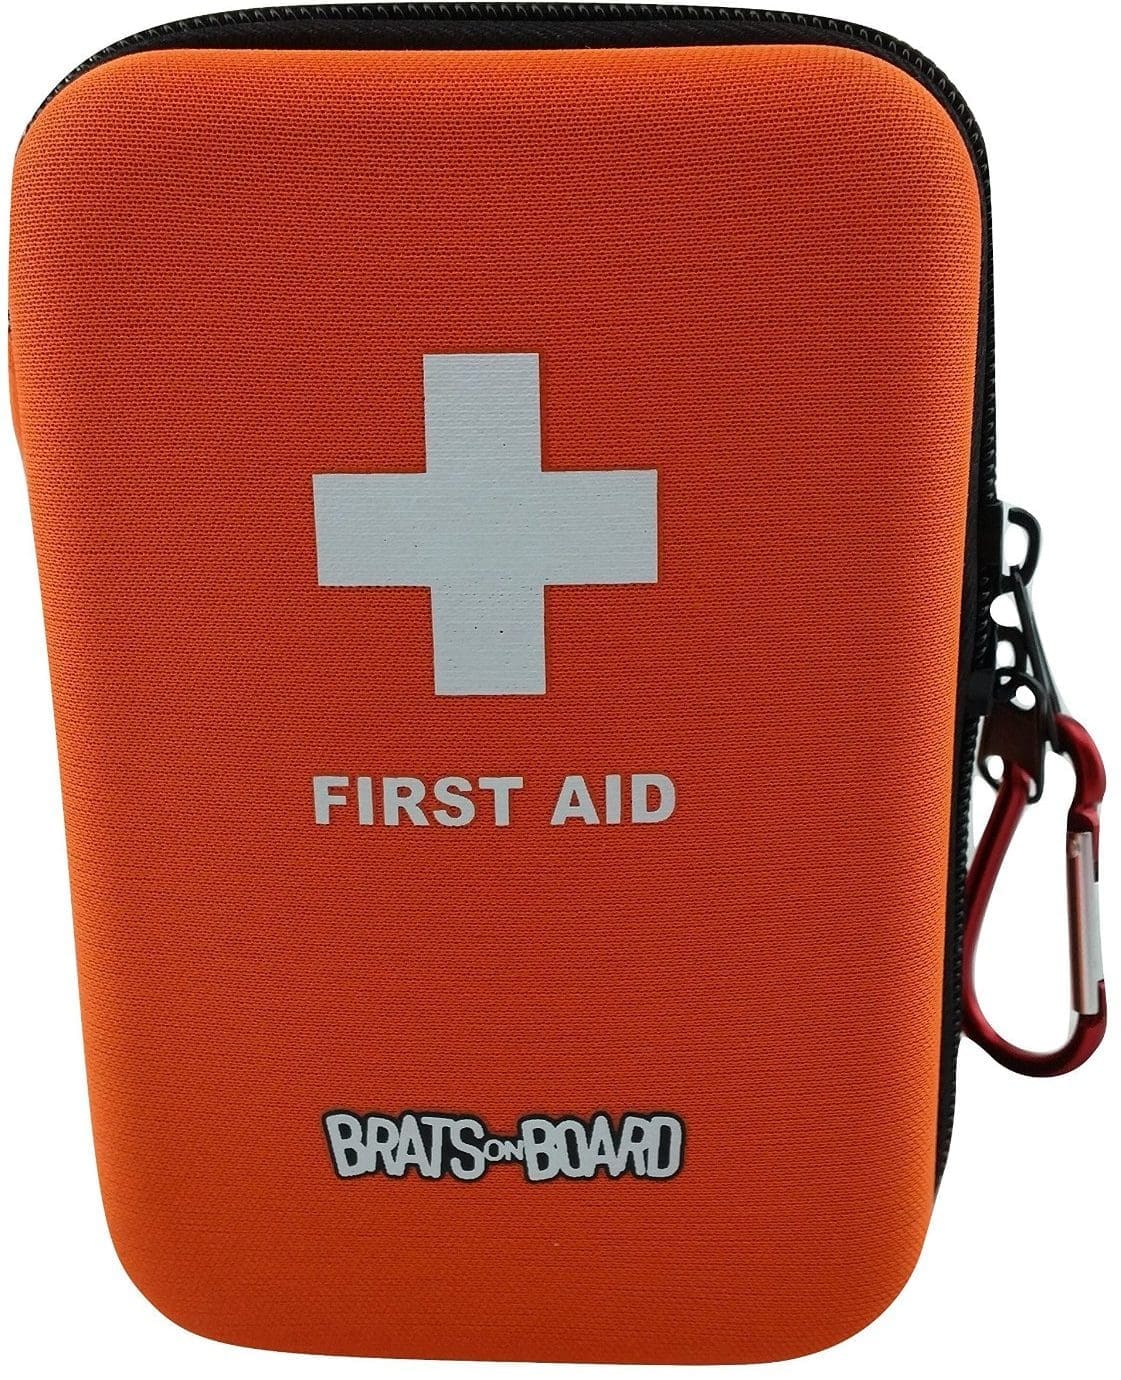 Brats On Board First Aid Kit